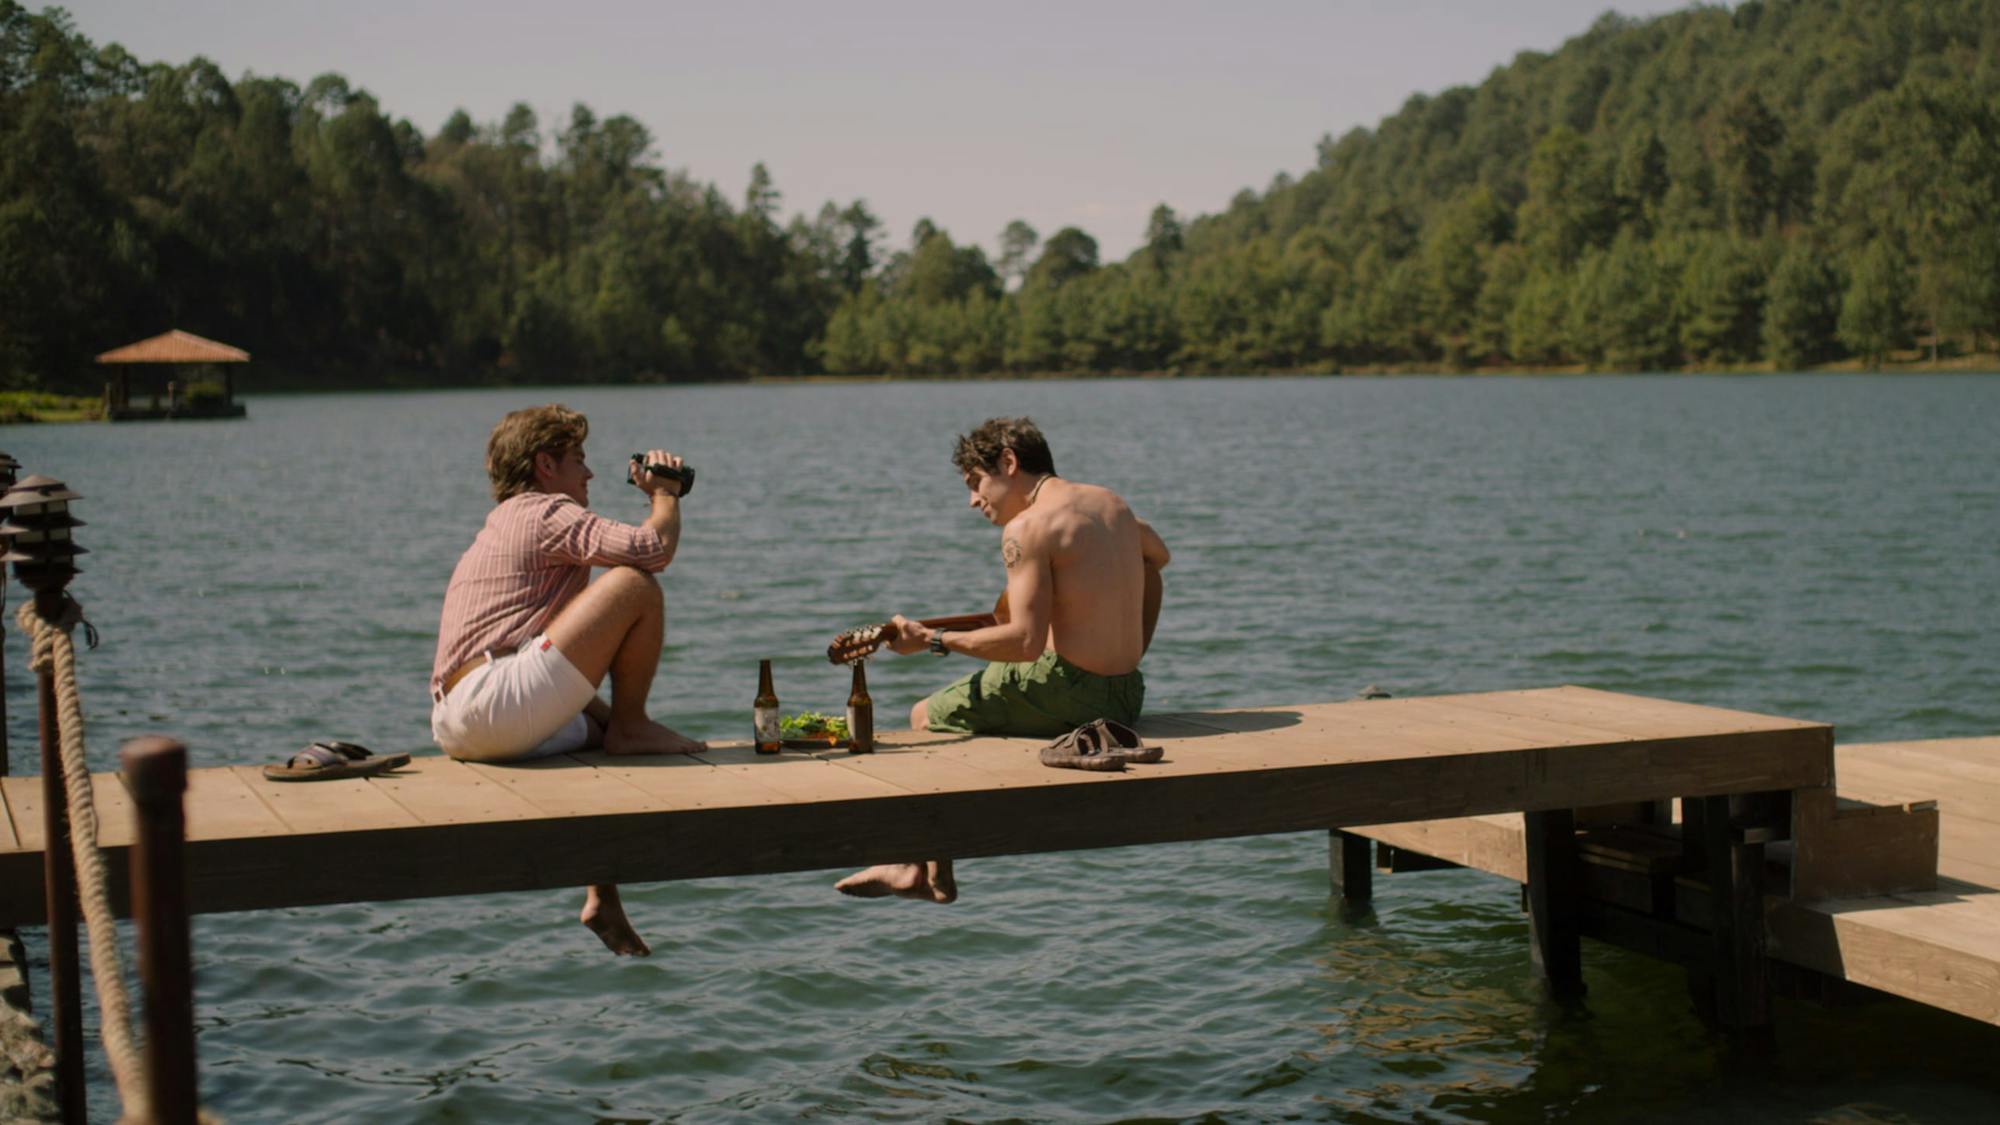 Two men sit on a dock. Water sloshes beneath their dangling feet as one man films the other playing guitar. Beside the men are two sets of flip flops and beer bottles. The lake and mountain behind them make the scene idyllic.